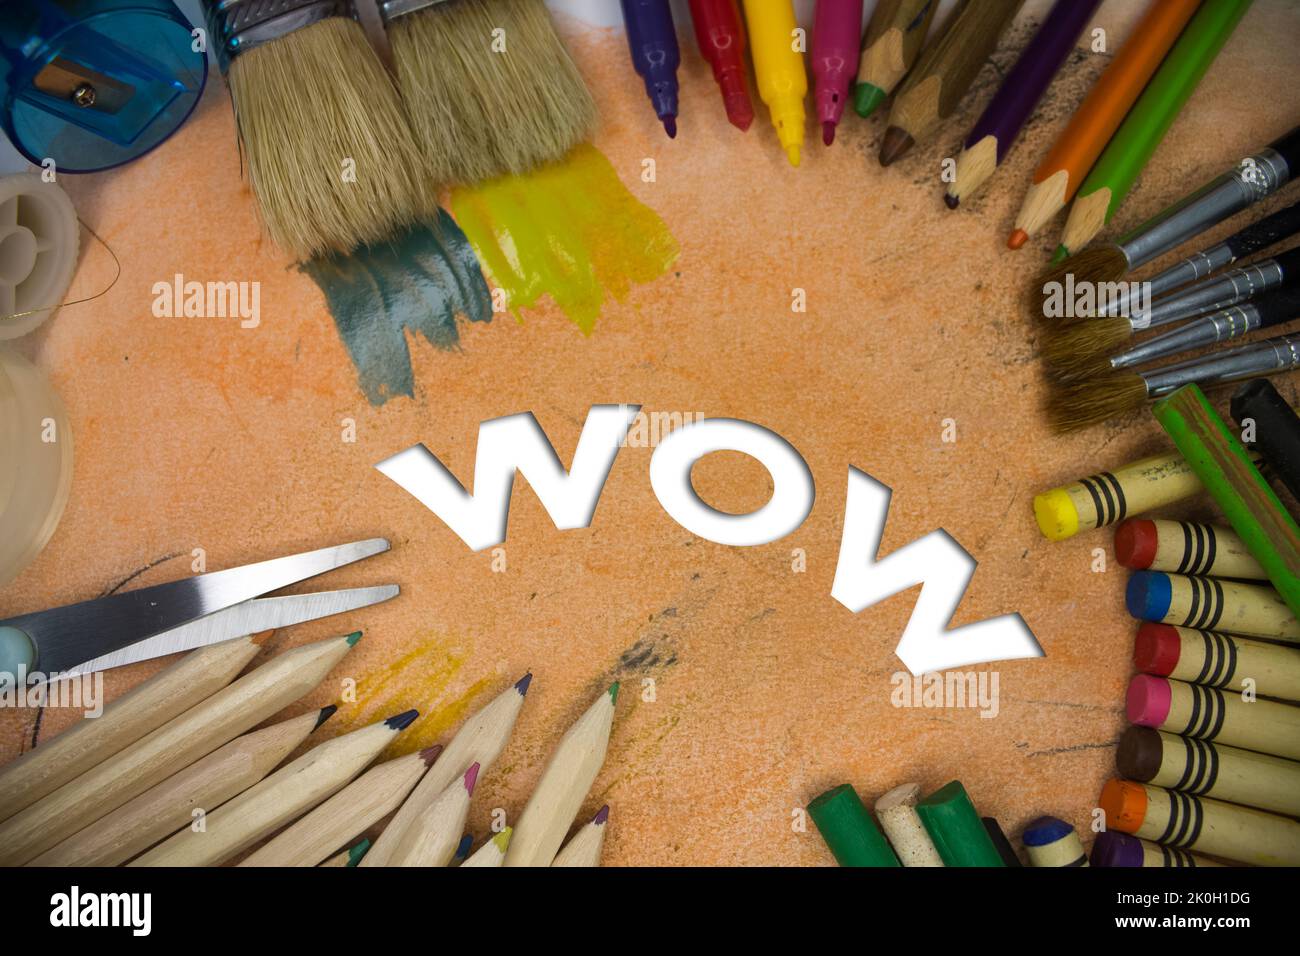 Overhead shot of school supplies with Wow text. Brushes, pencils, artistic tools. Art And Craft Work Tools. Stock Photo